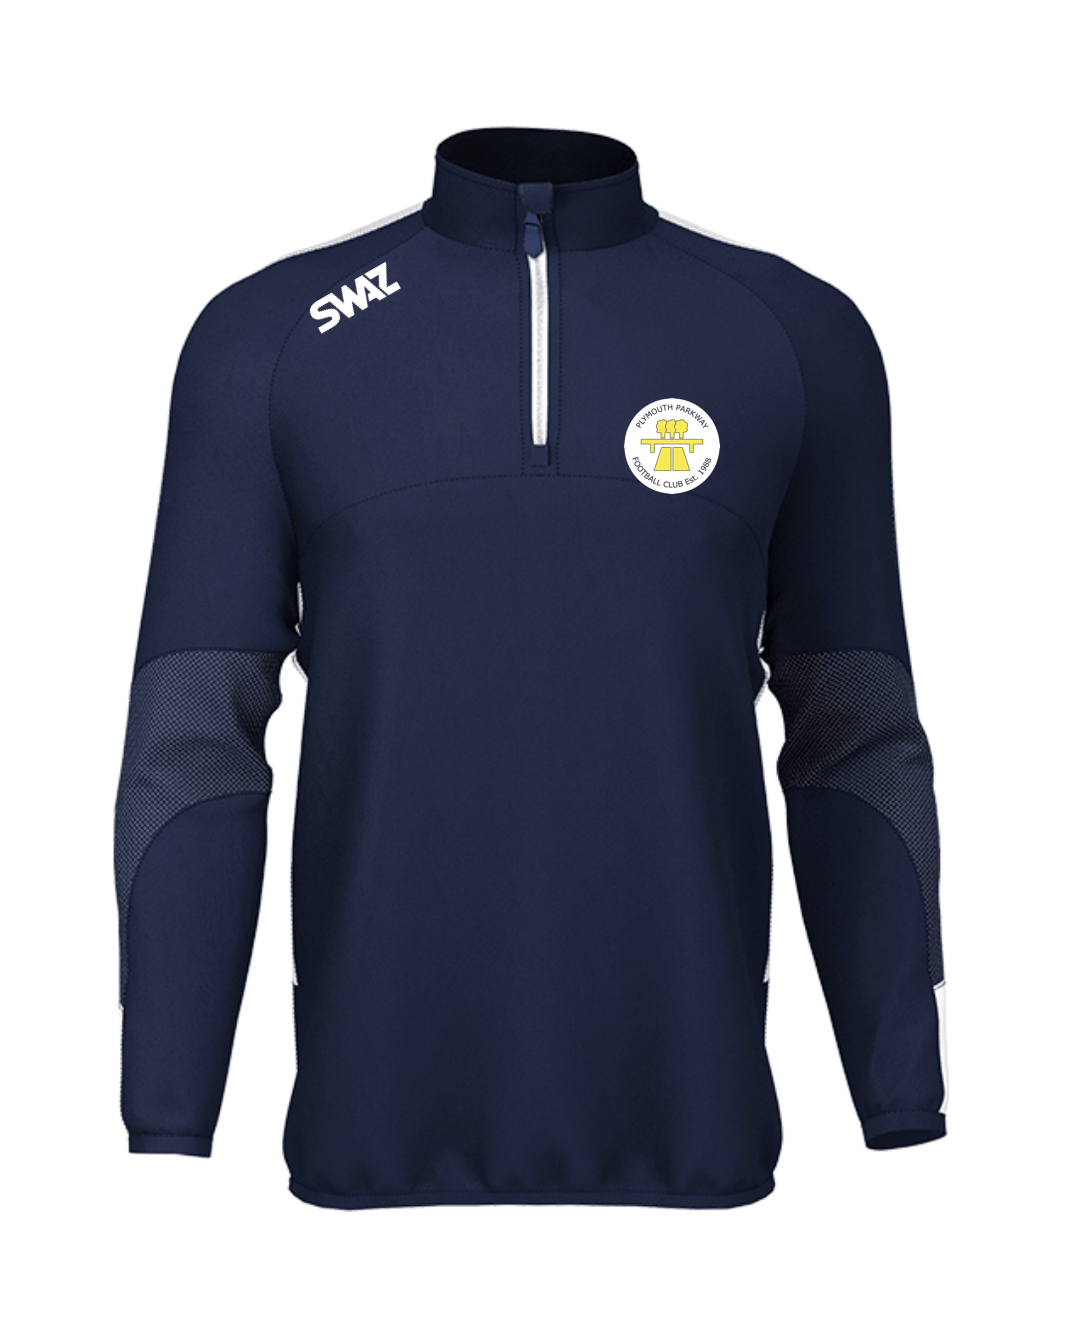 Elite Plymouth Parkway Mid-layer | Football Training Kit and Teamwear